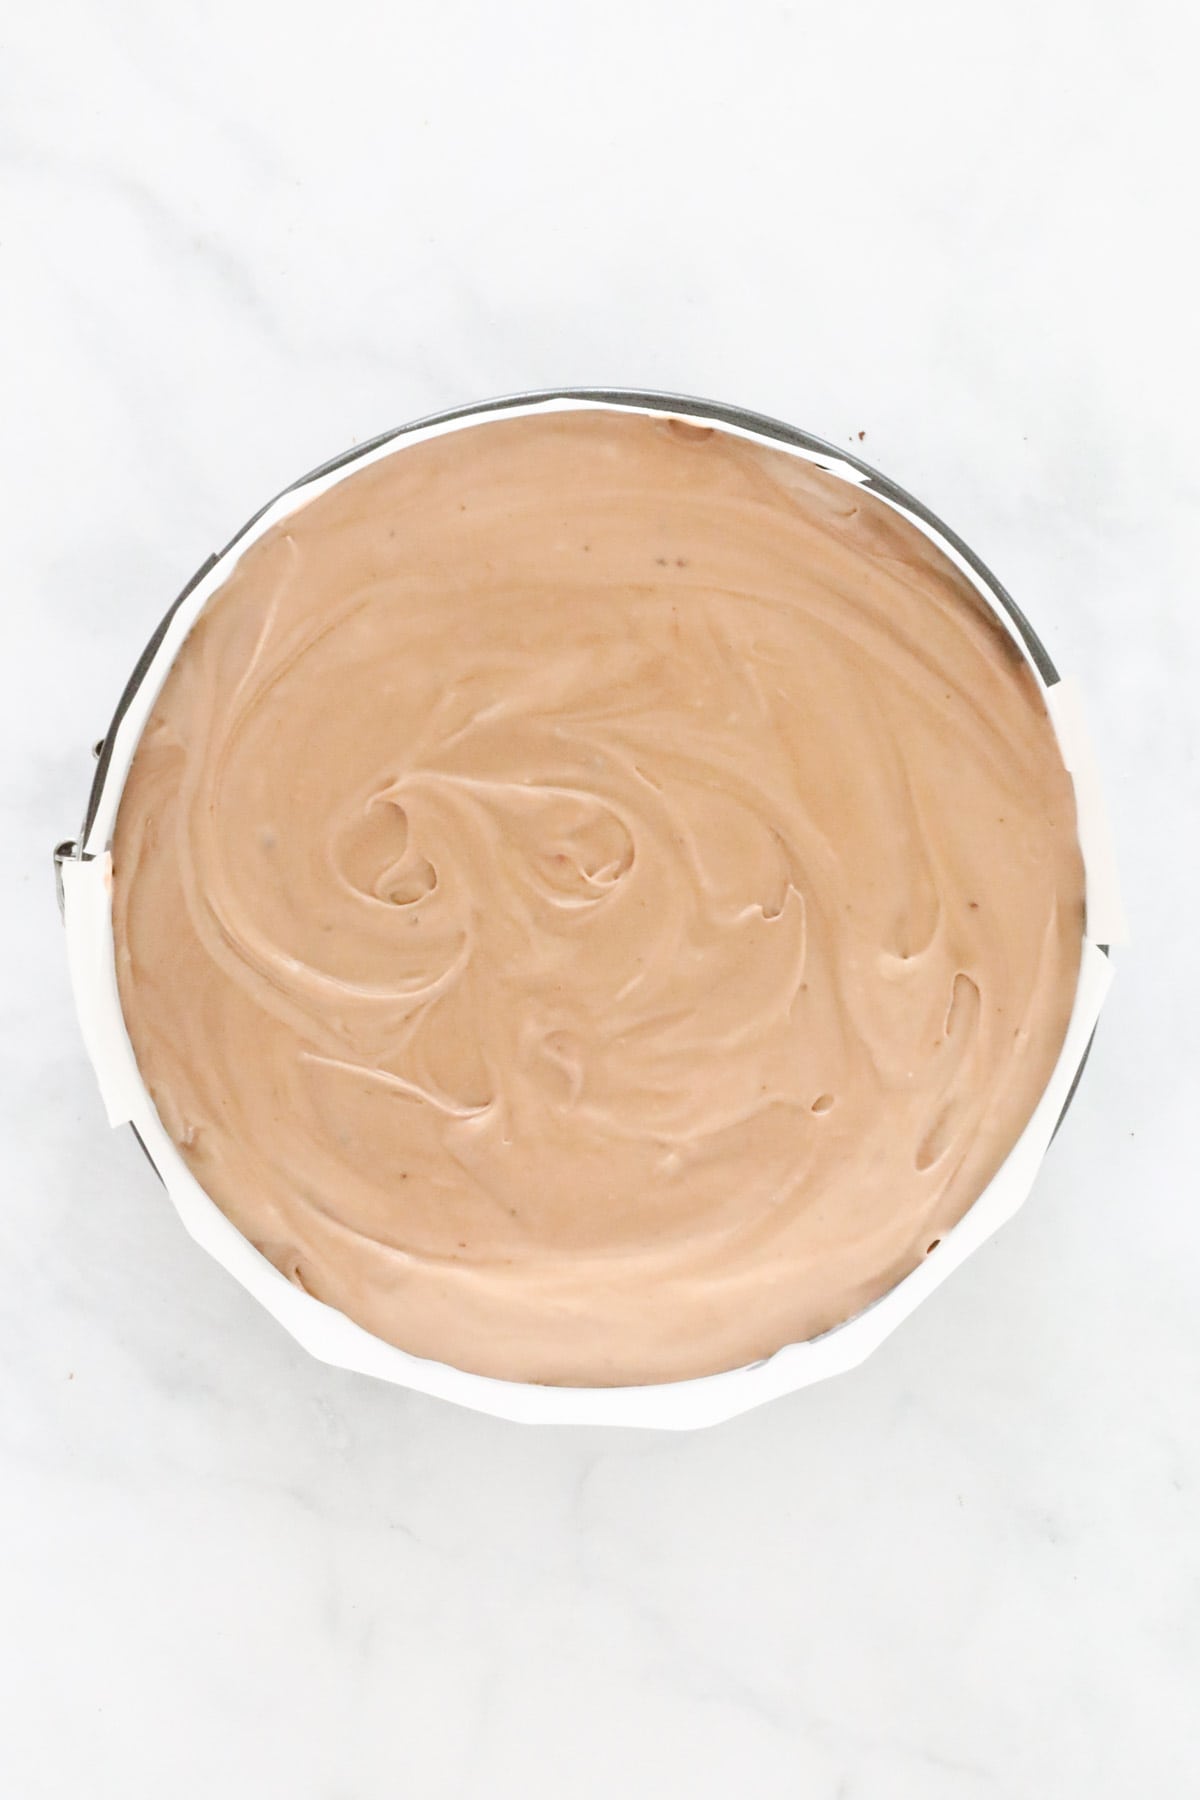 Chocolate cheesecake filling spread over the biscuit base in springform tin.